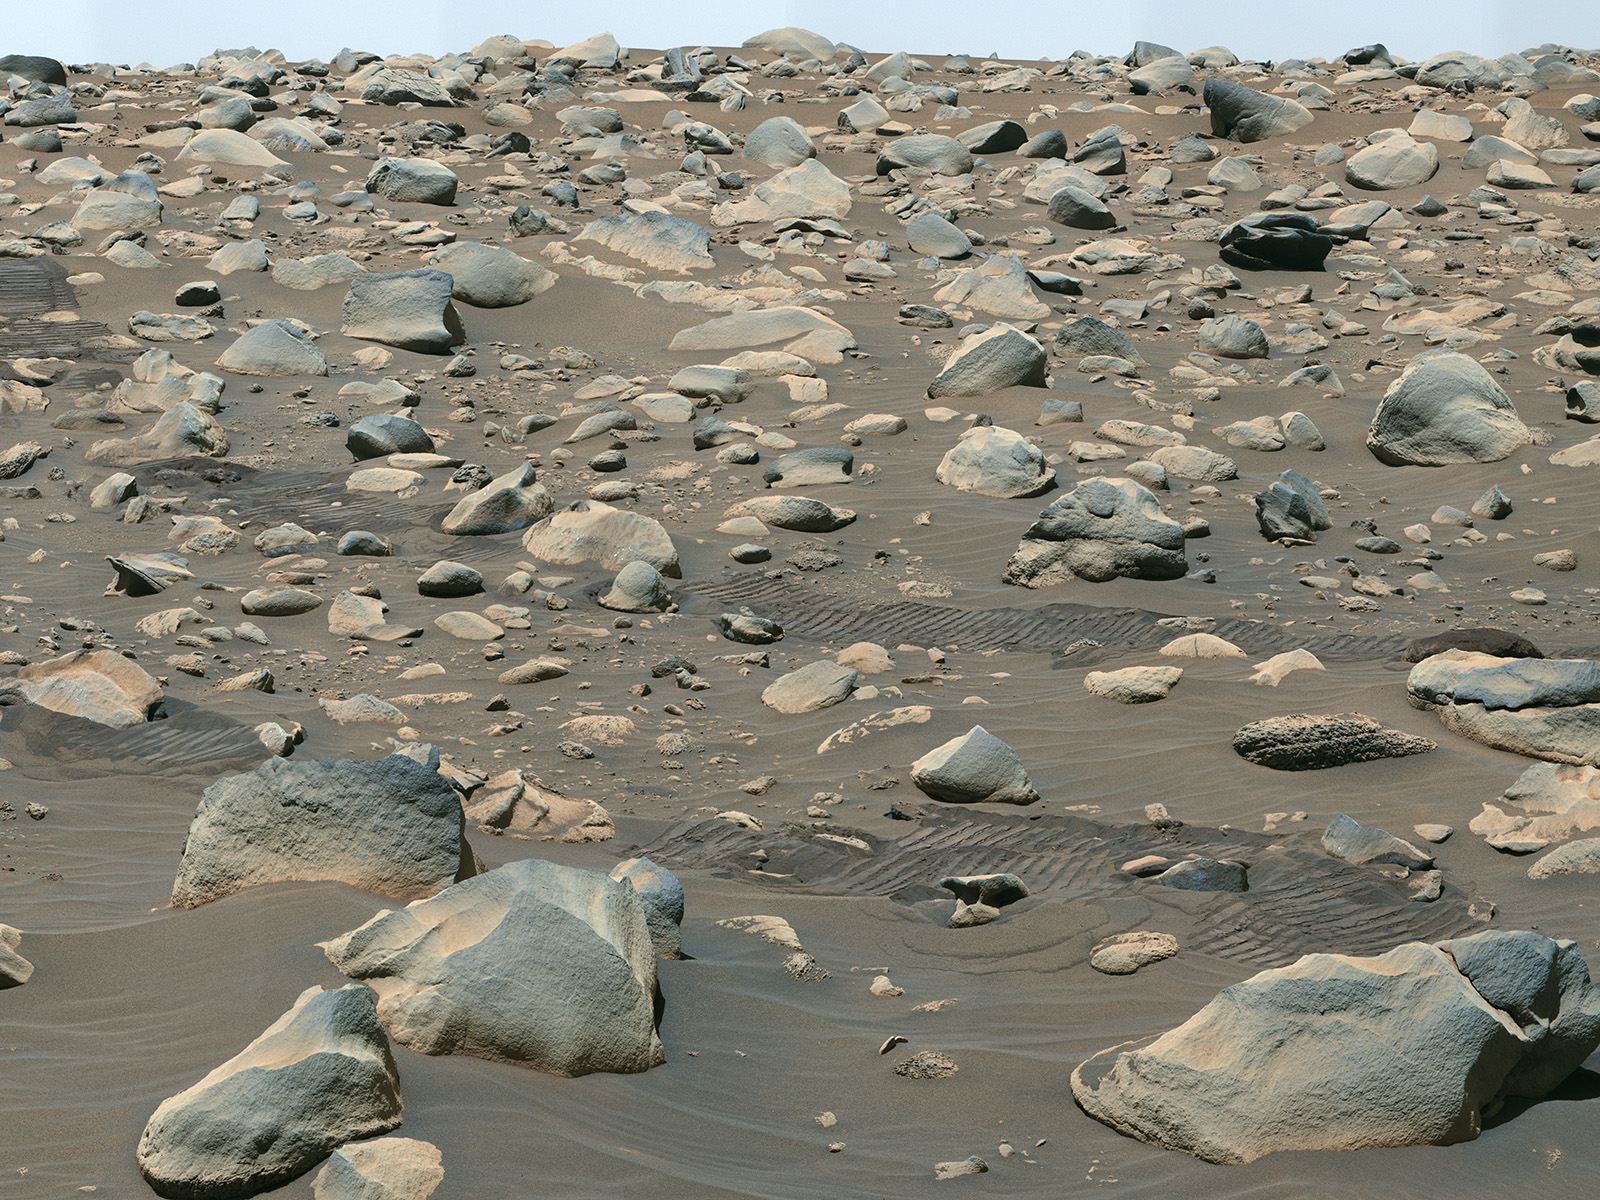 The Mastcam-Z imager on NASA’s Perseverance rover captured a series of images on July 6 that were stitched together to show a field of boulders deposited in Jezero Crater by a fast-moving ancient river.